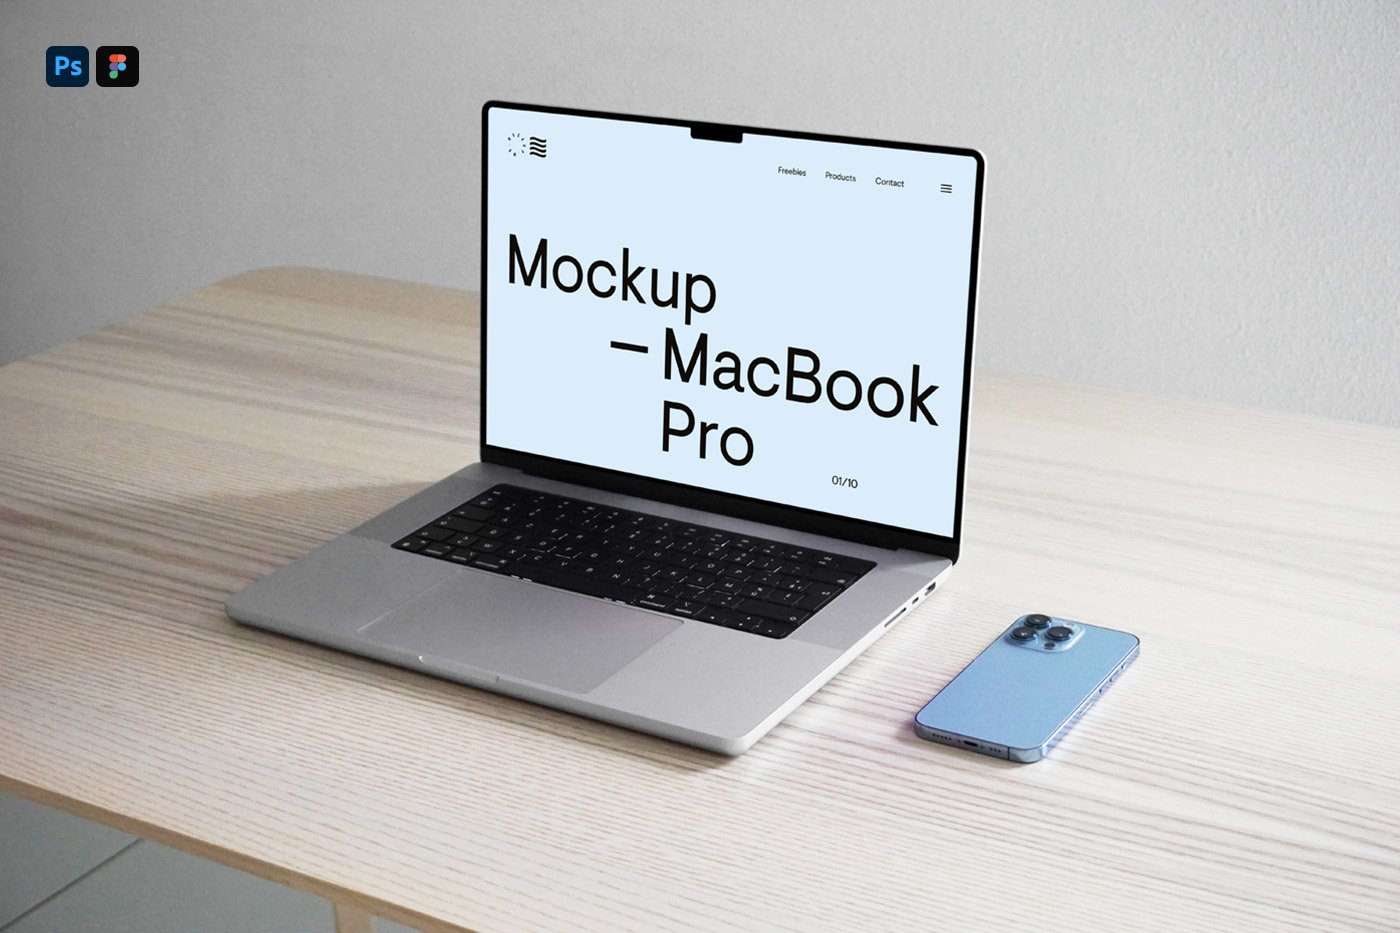 Macbook Pro Mockup on Desk with iPhone